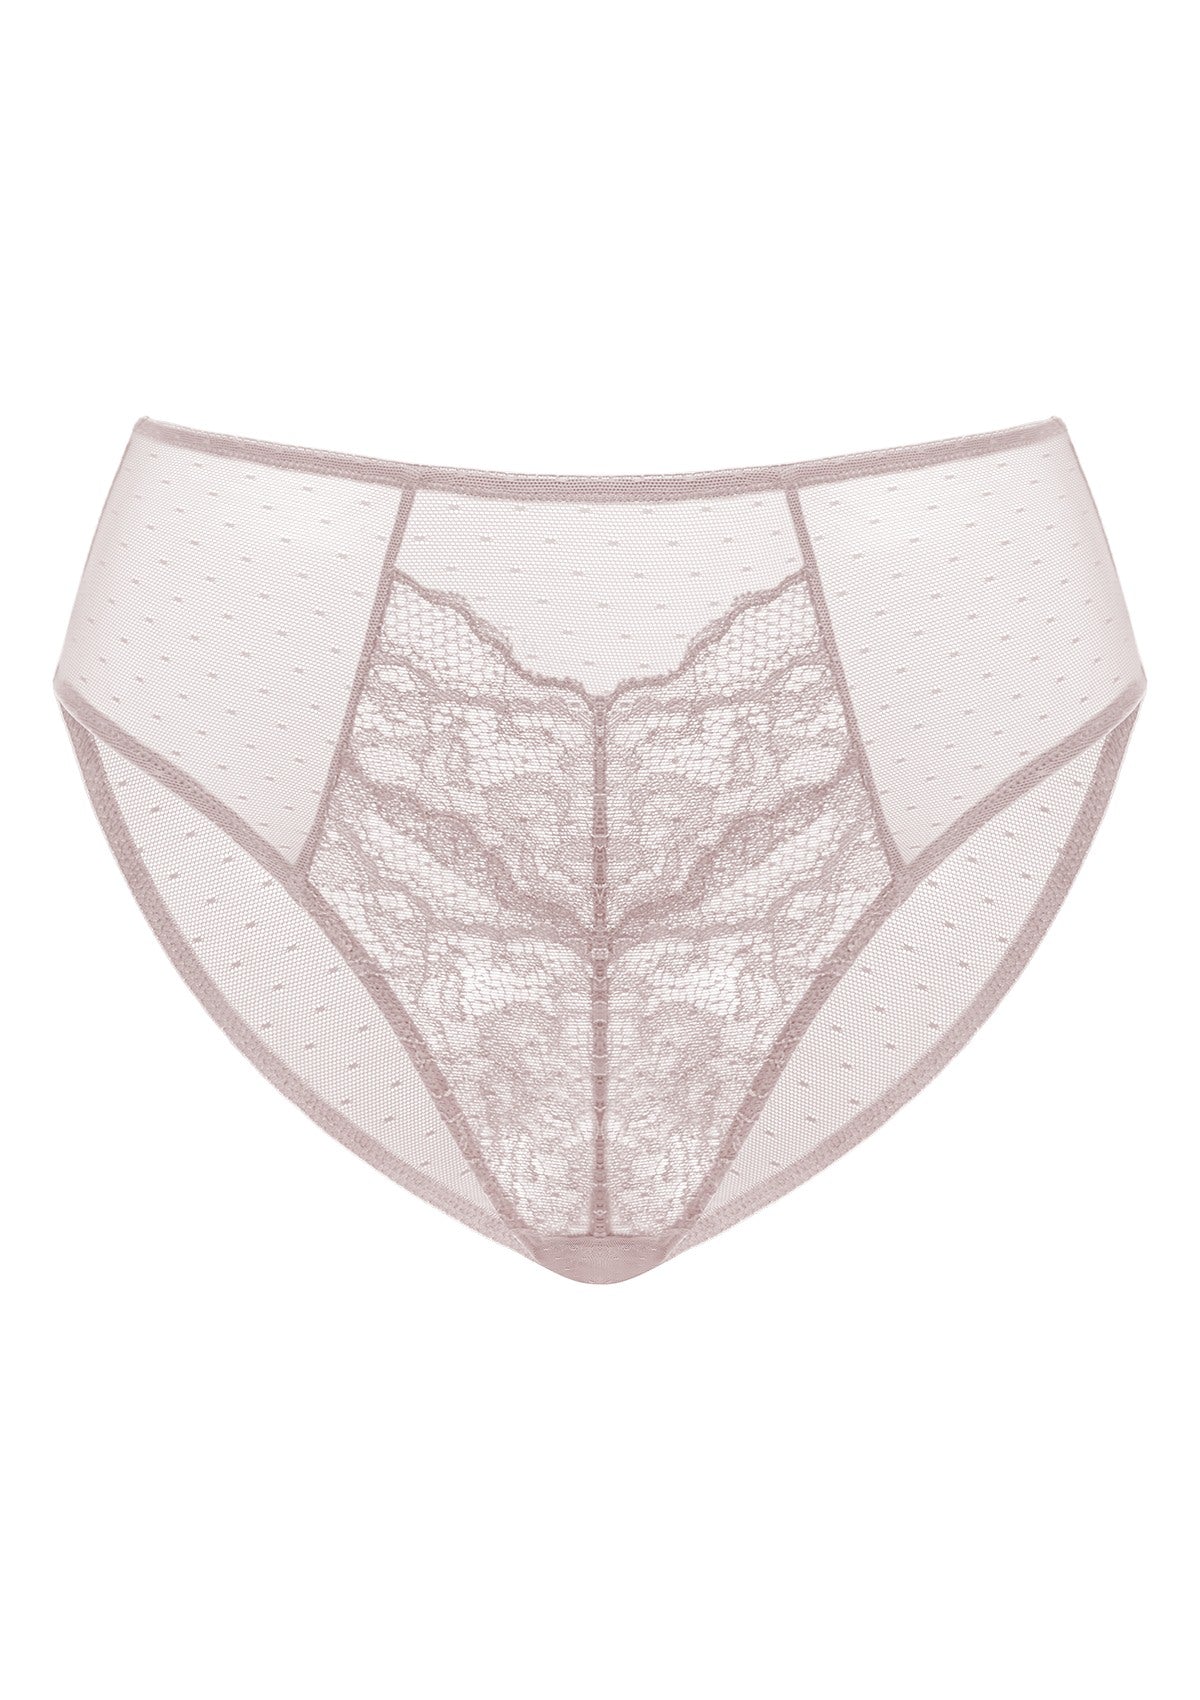 HSIA Enchante High-Rise Floral Lacy Panty-Comfort In Style - L / Dark Pink